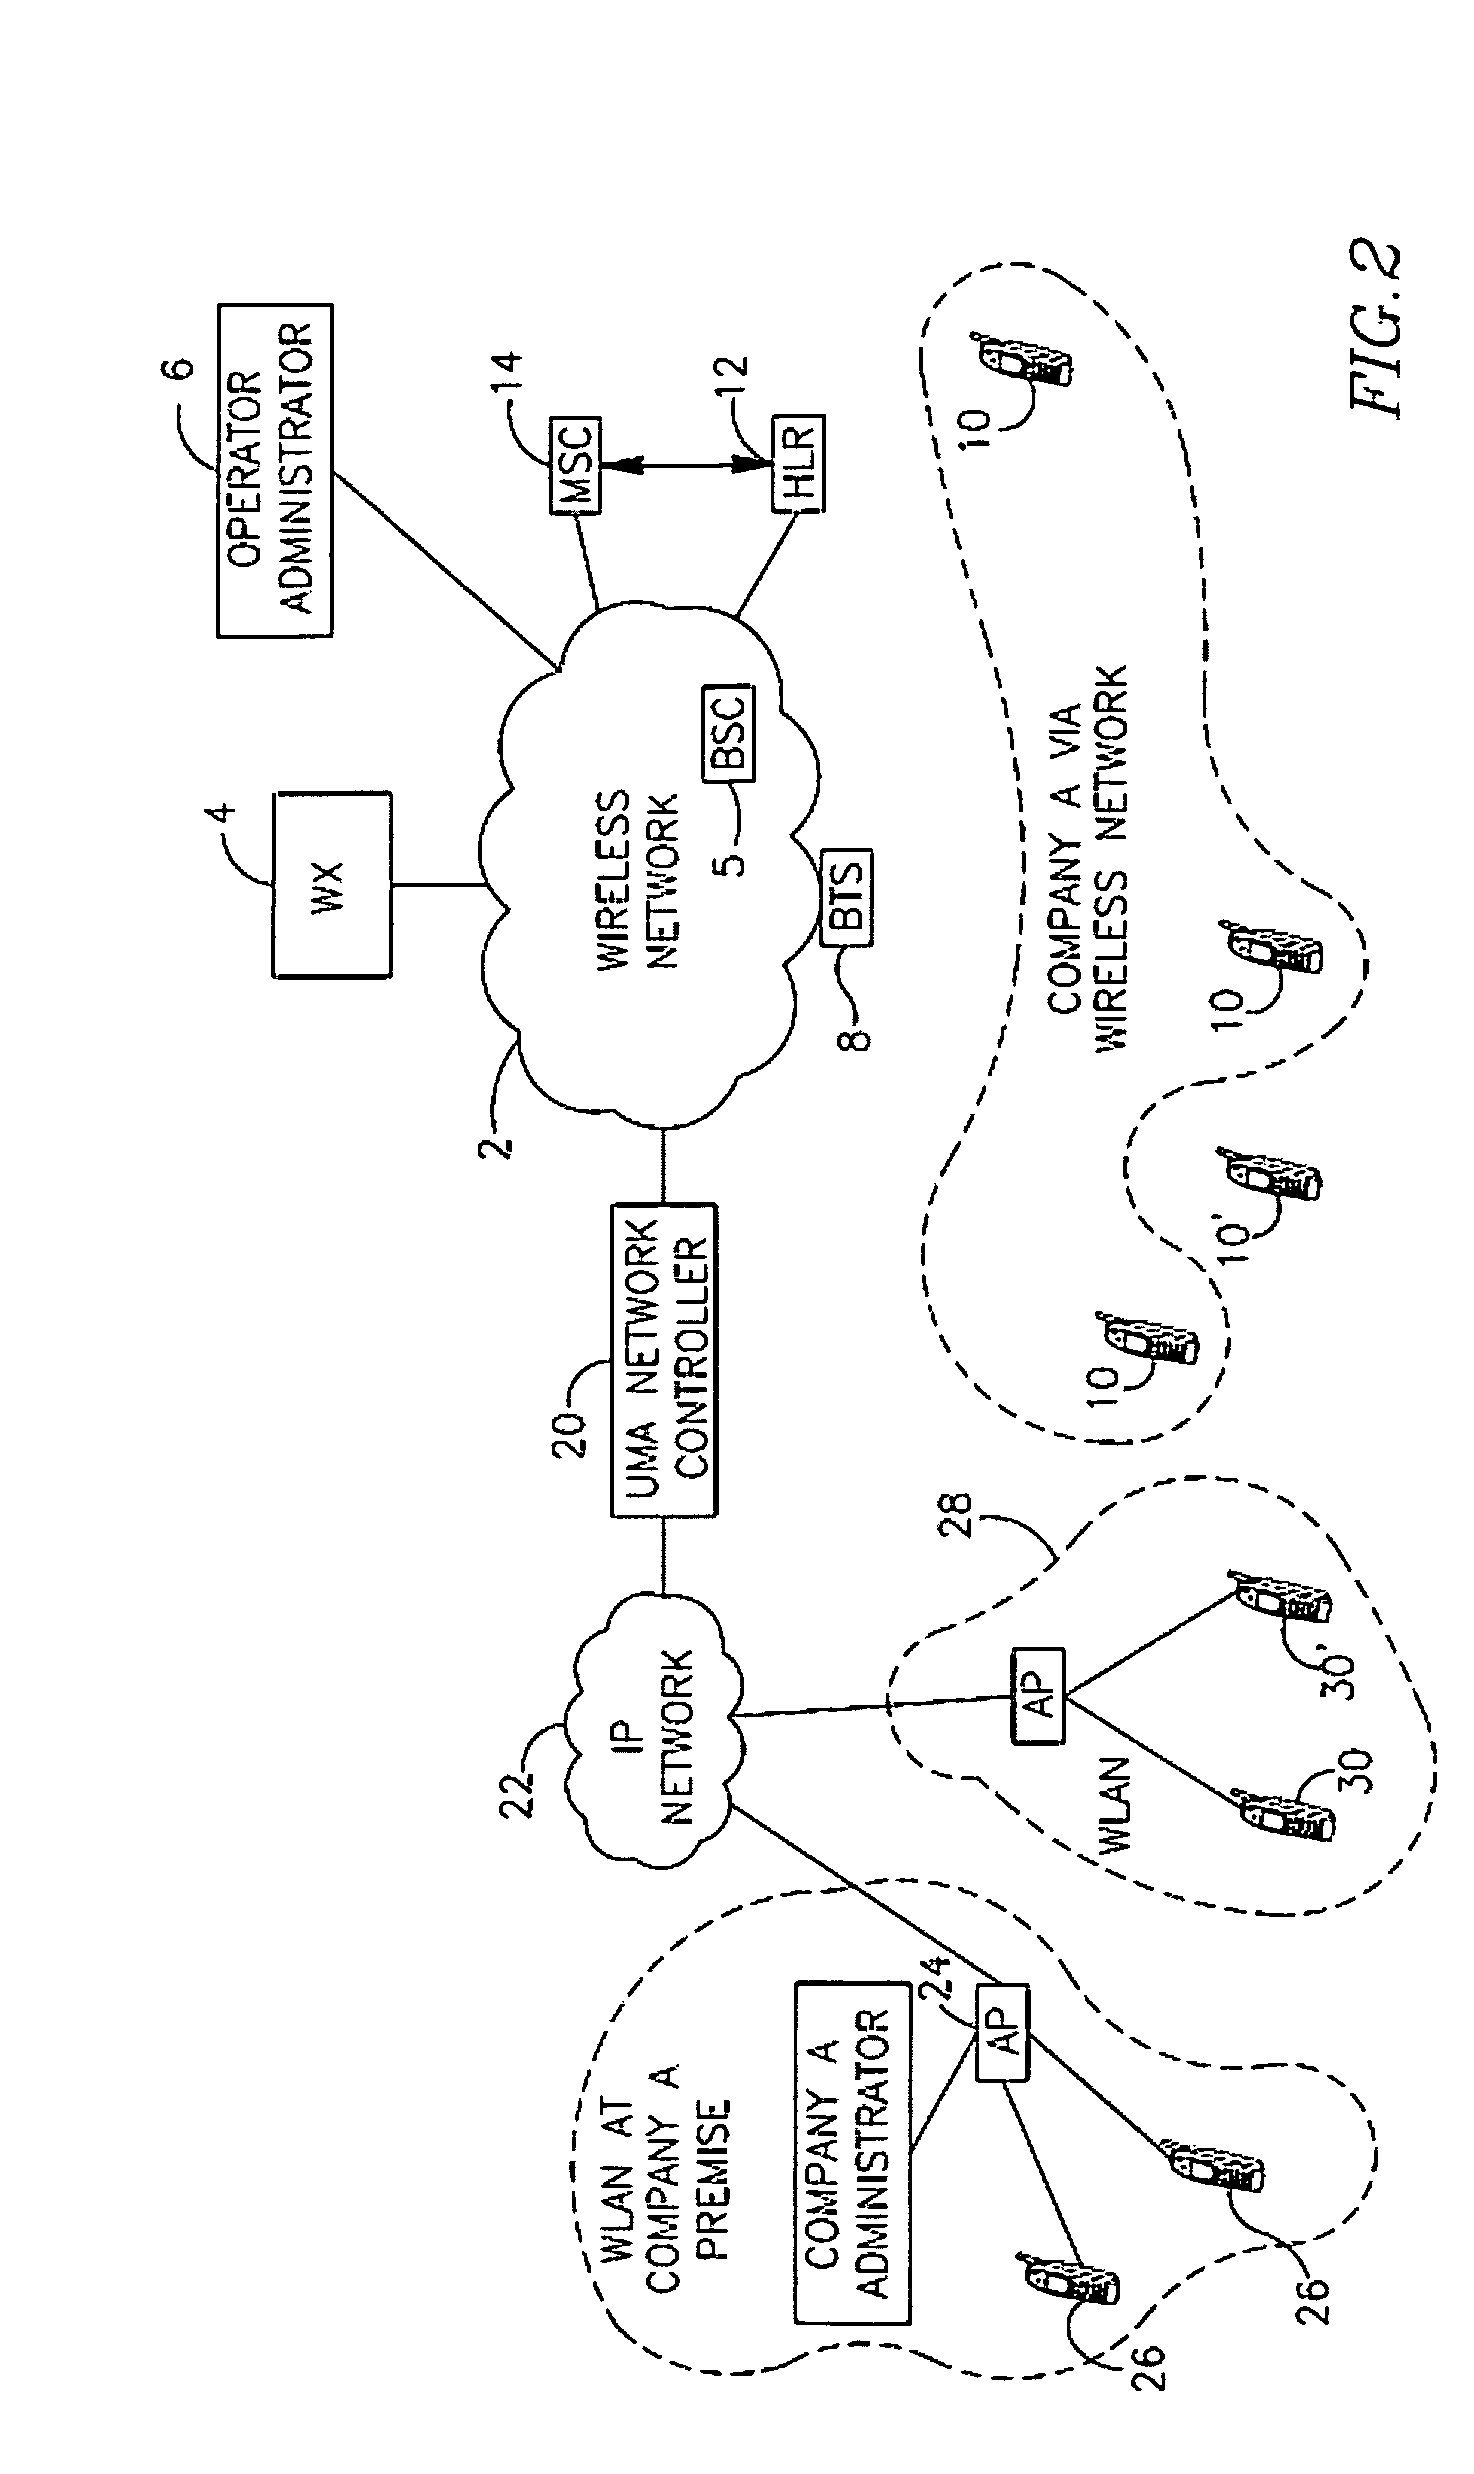 Unstructured supplementary service data application within a wireless network